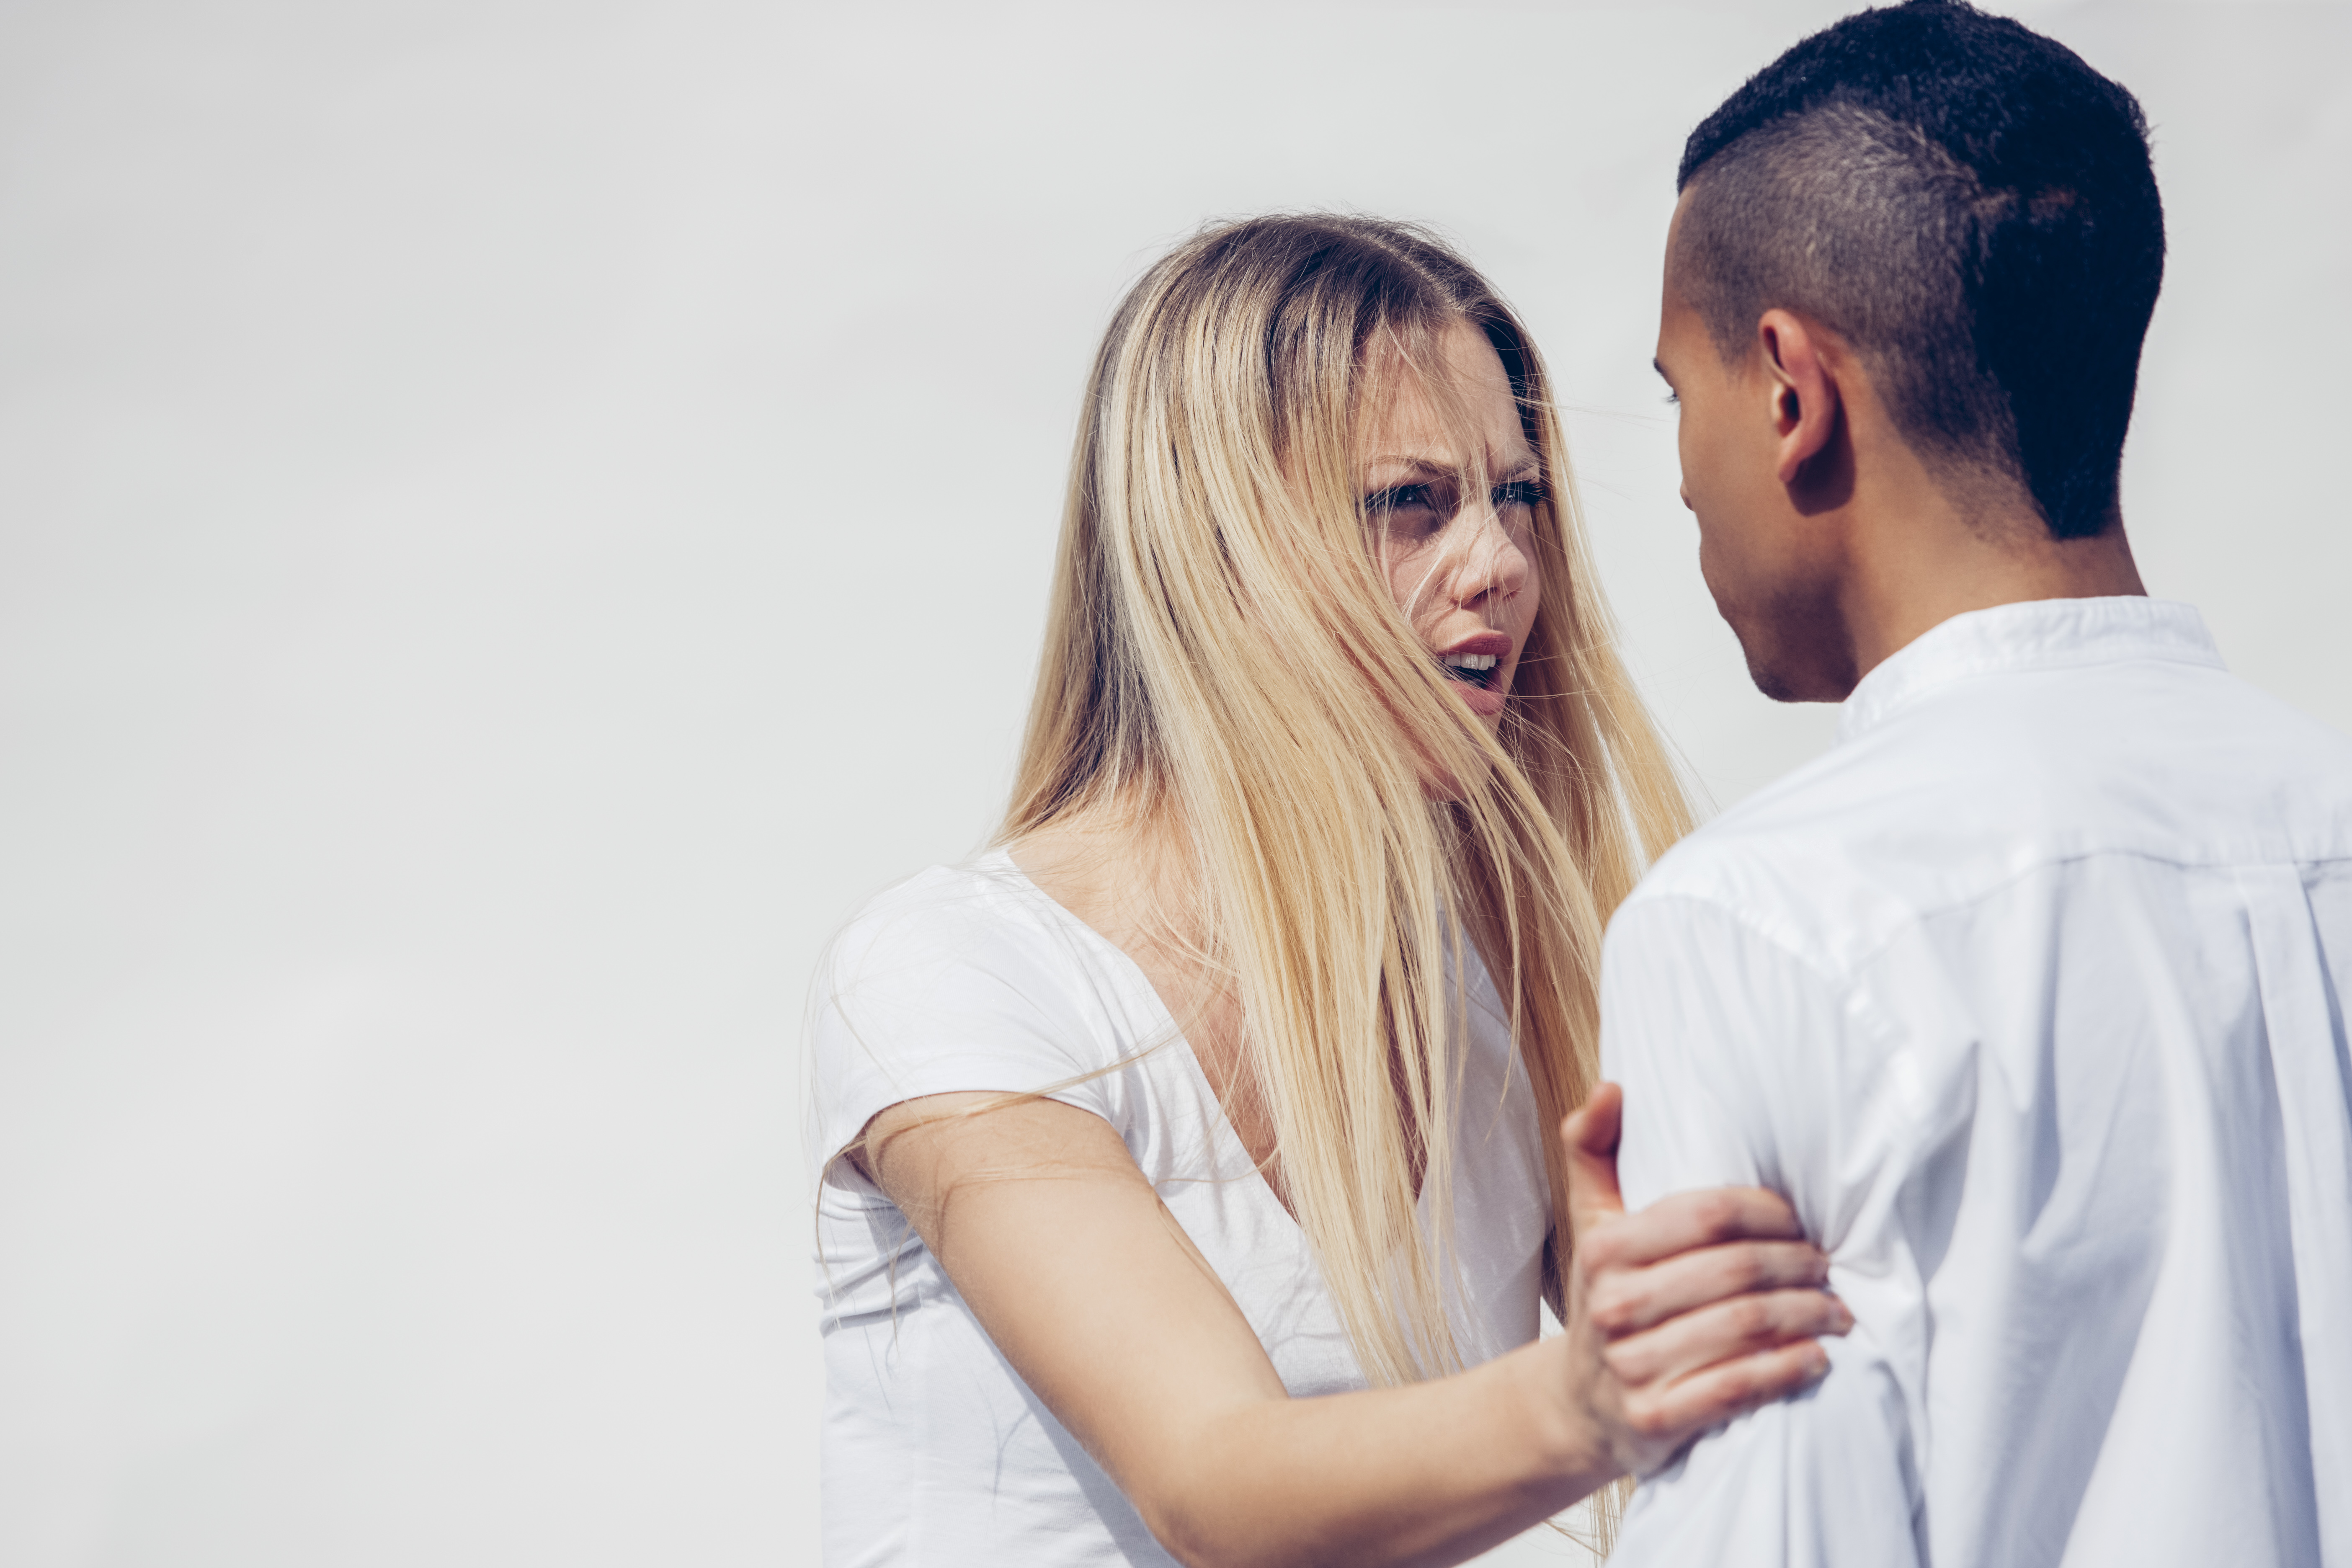 Portrait of angry young woman face to face with her boyfriend in front of white background | Source: Getty Images